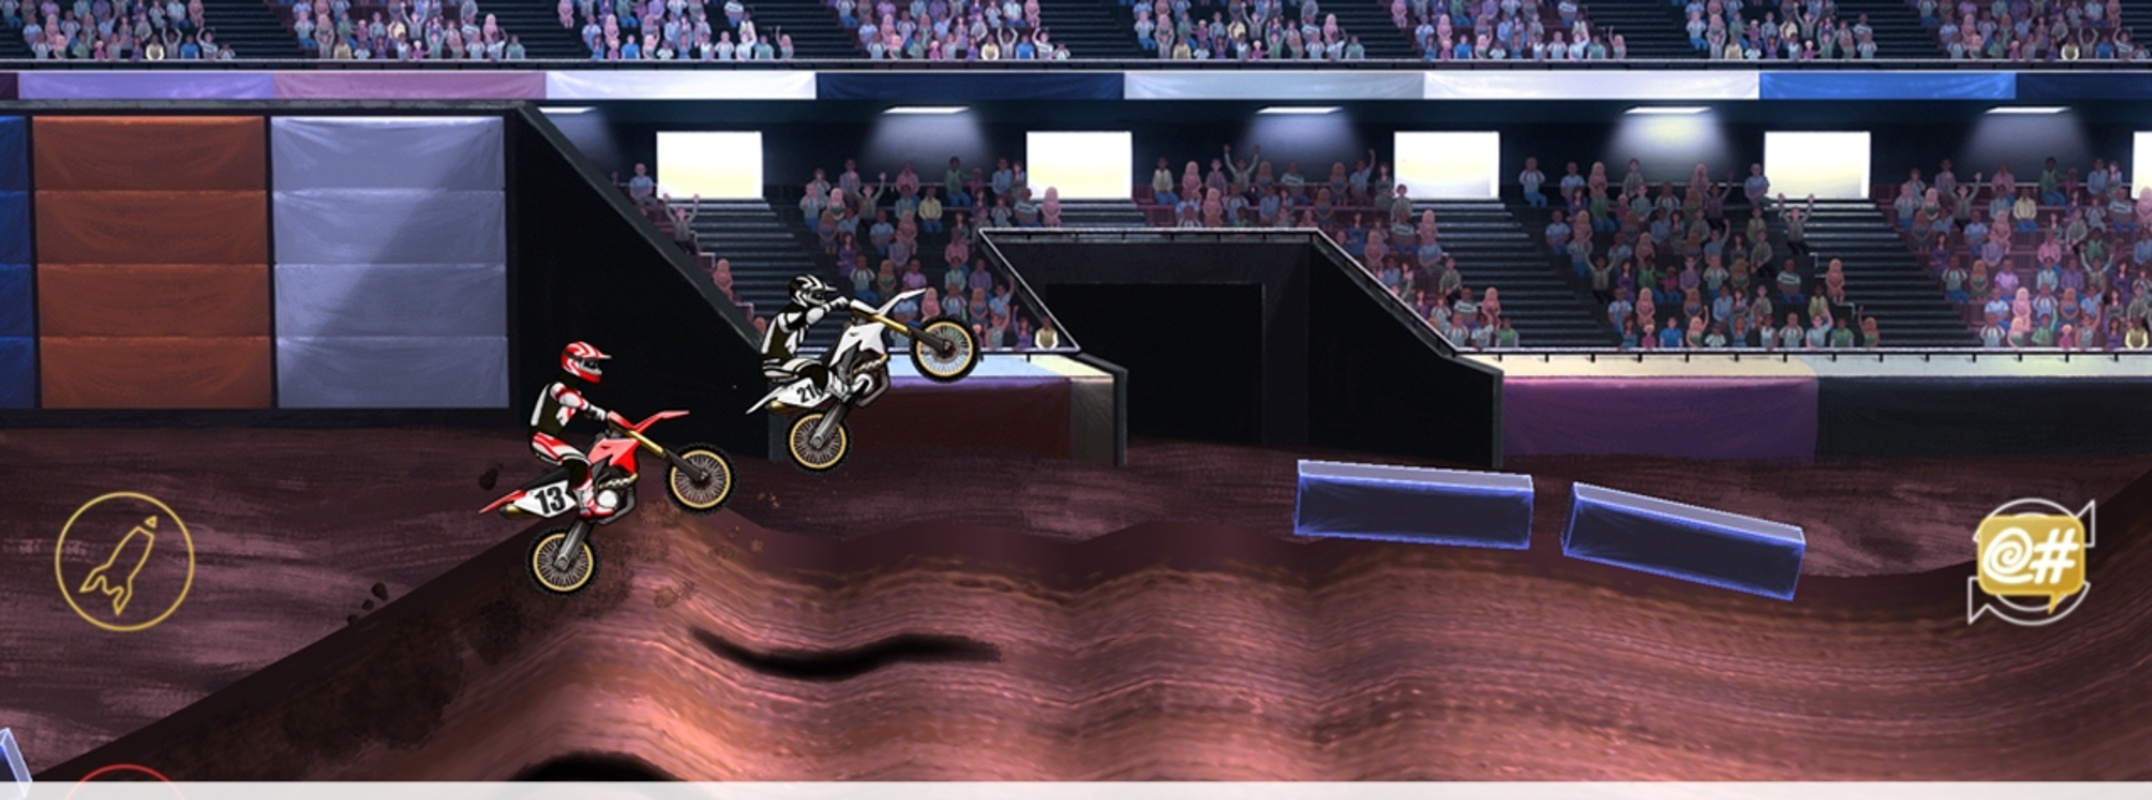 Mad Skills Motocross 2 2.35.4543 APK for Android Screenshot 2